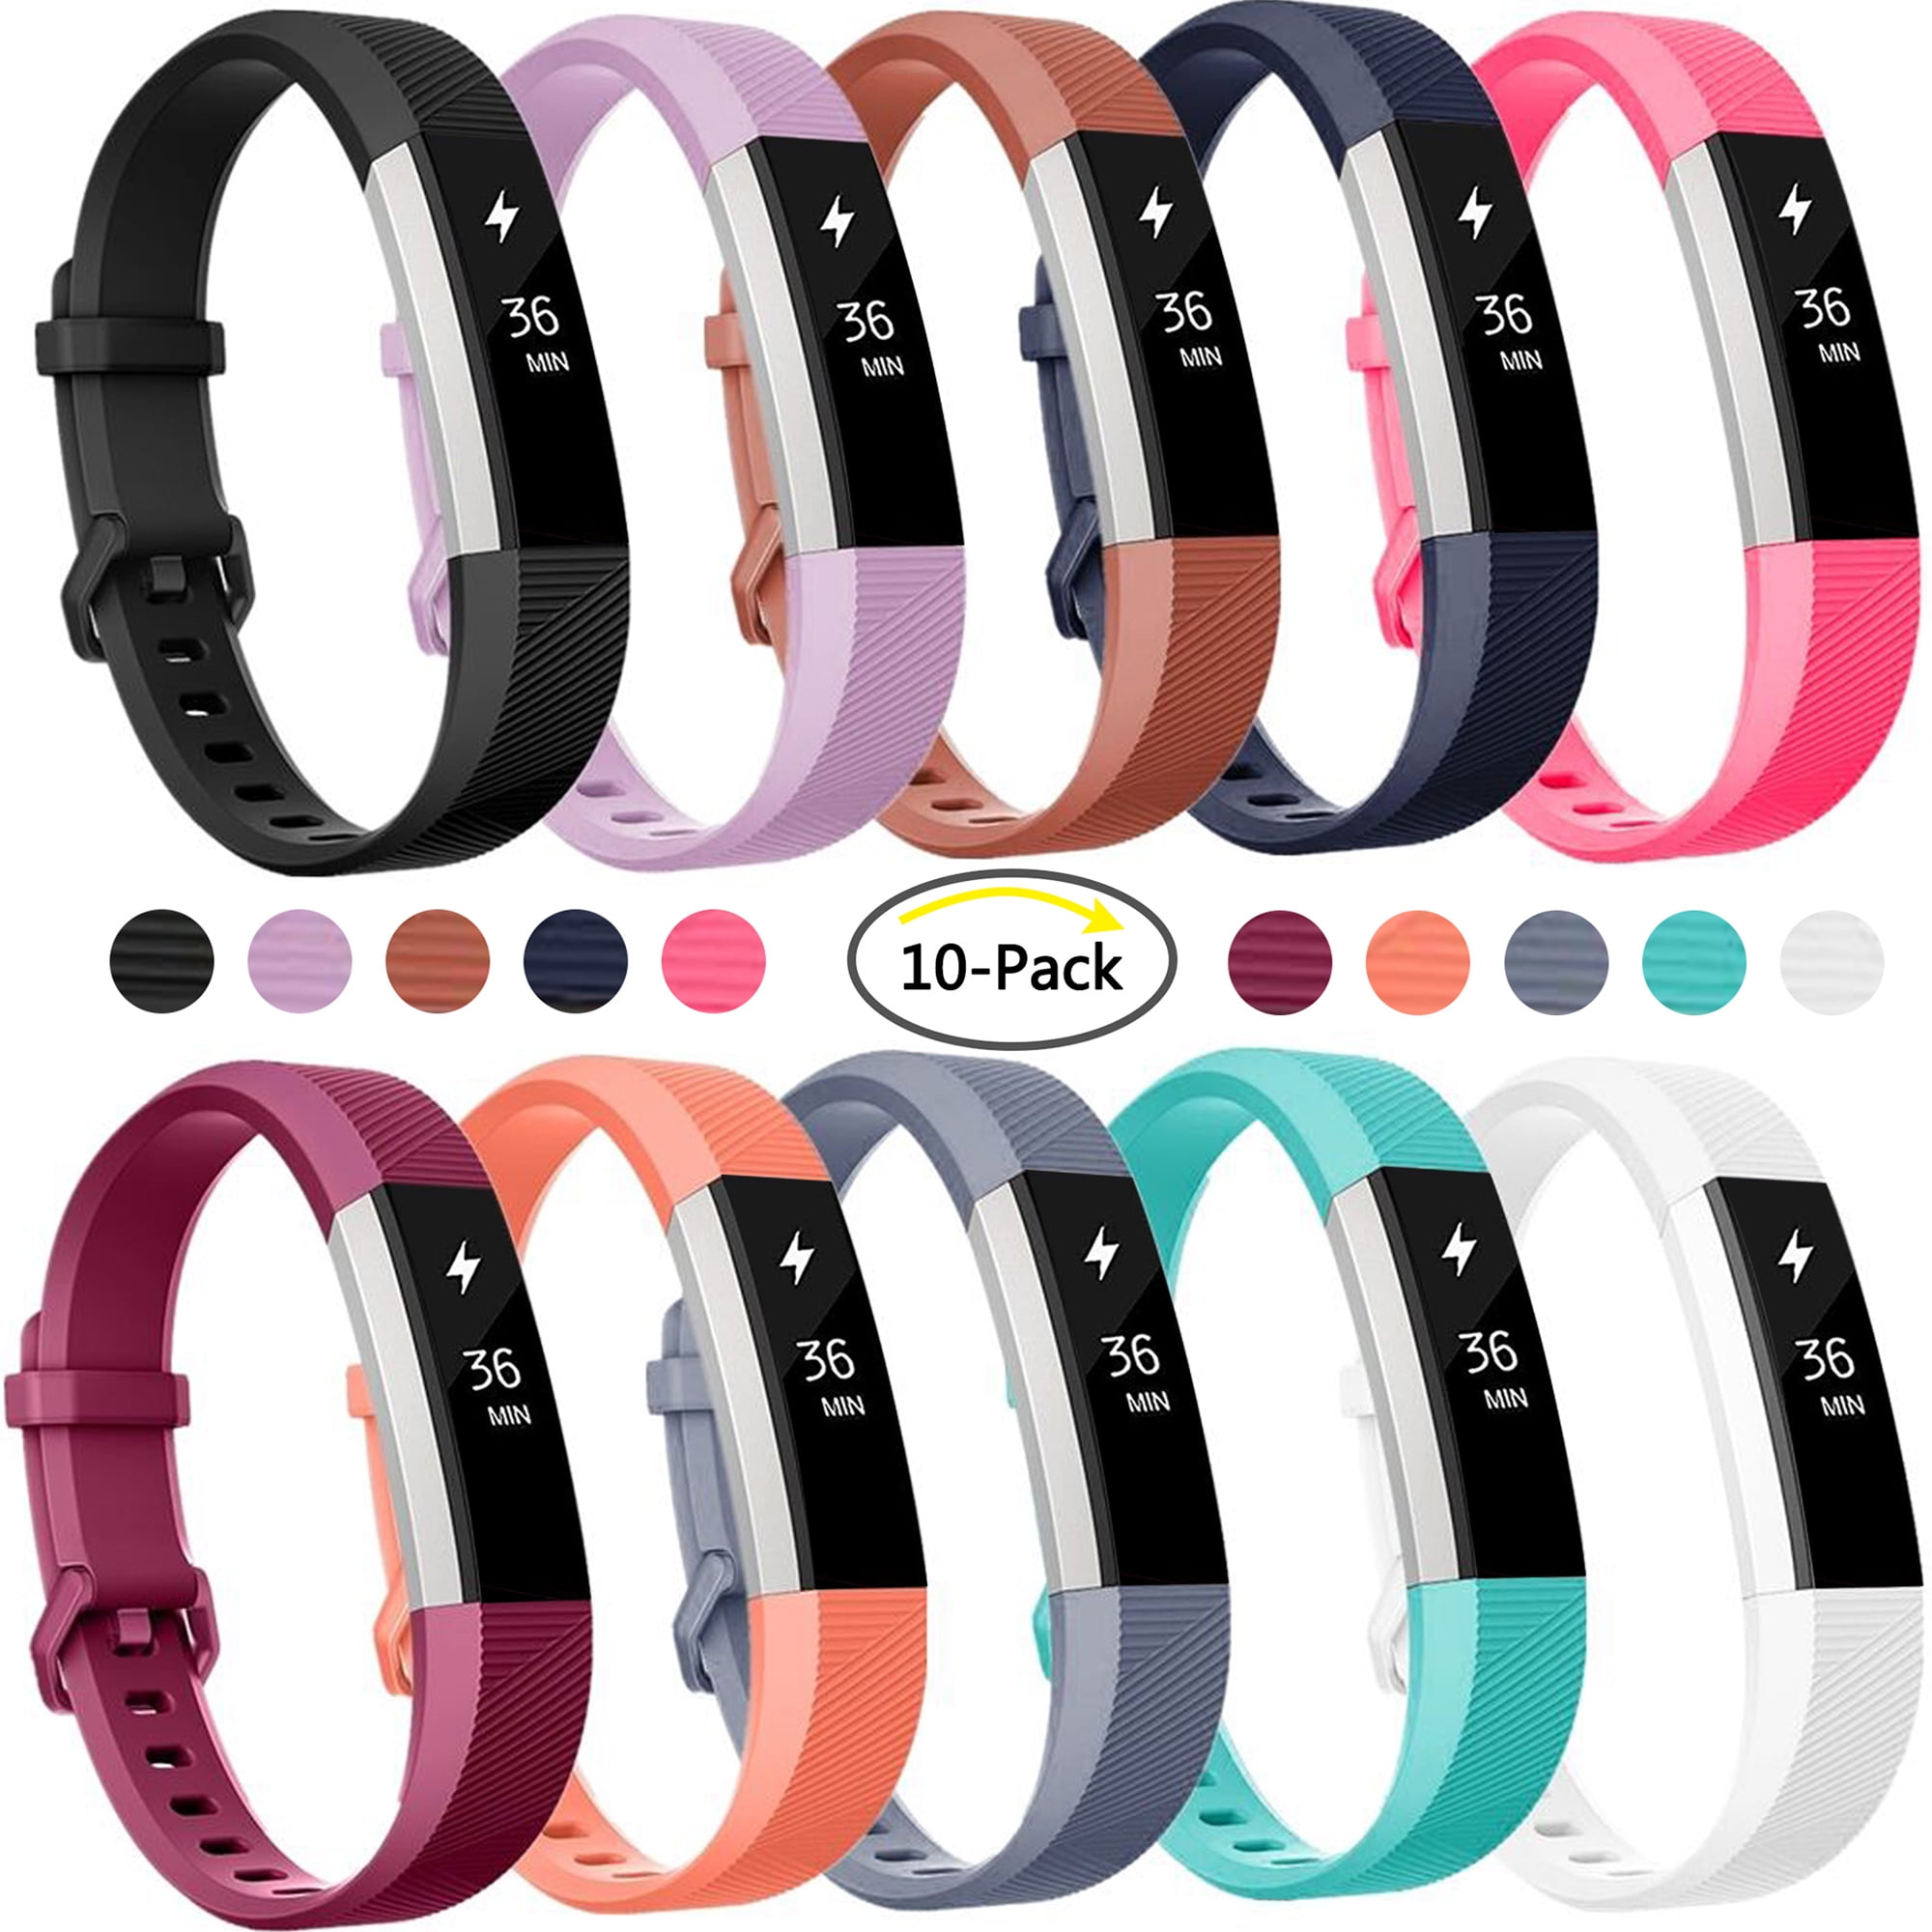 2 Pack Soft Breathable Silicone Replacement Wristbands with Secure Metal Clasp Men Women Kids Small Large SKYLET Compatible with Fitbit Ace/Fitbit Alta/HR Bands